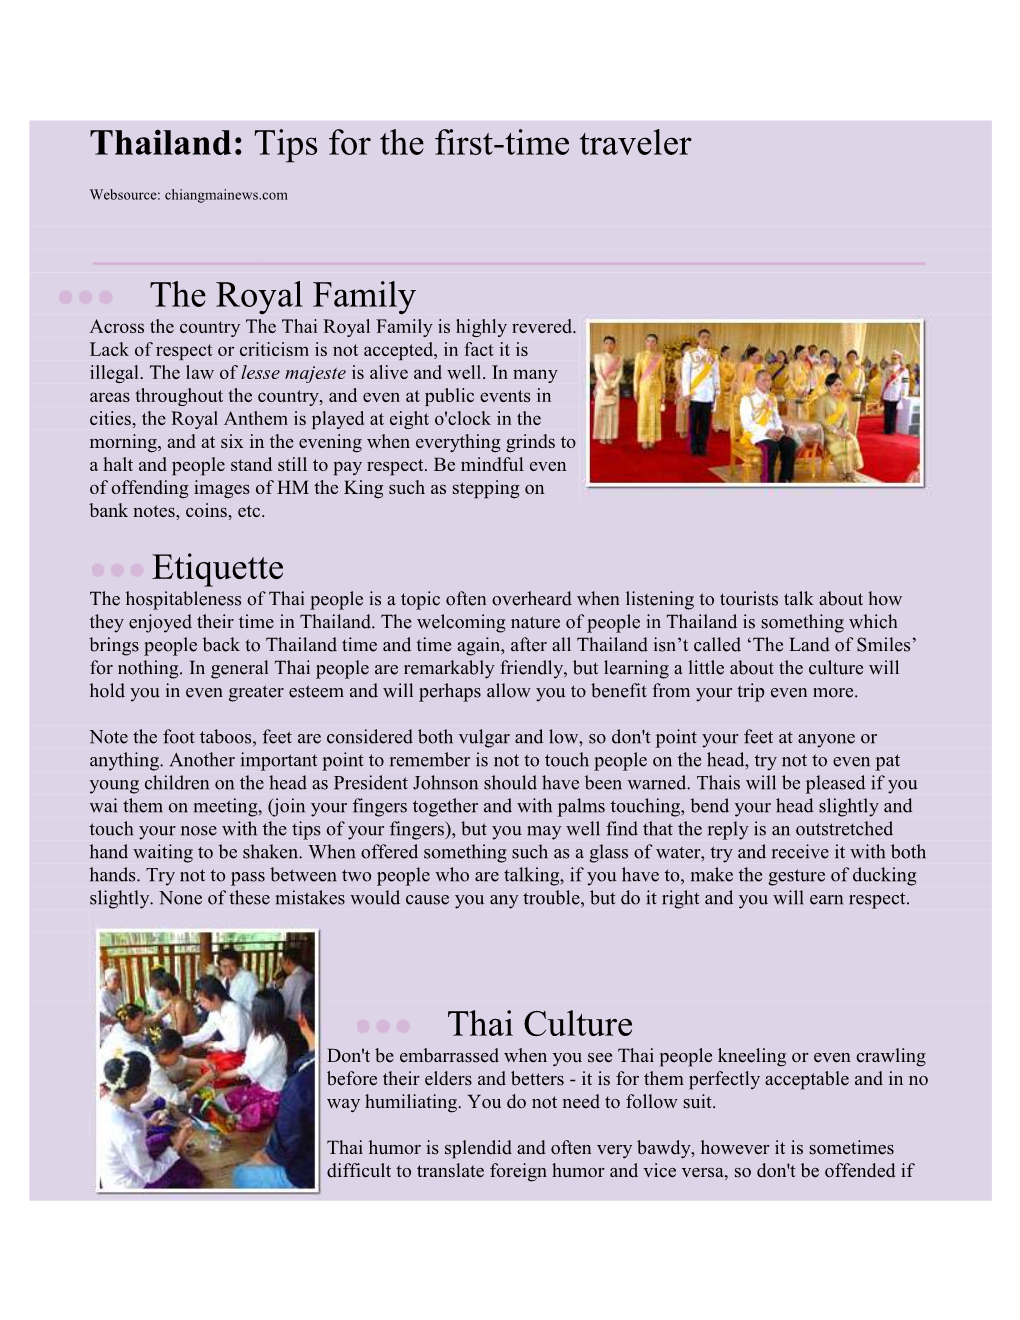 Thailand: Tips for the First-Time Traveler the Royal Family Etiquette Thai Culture